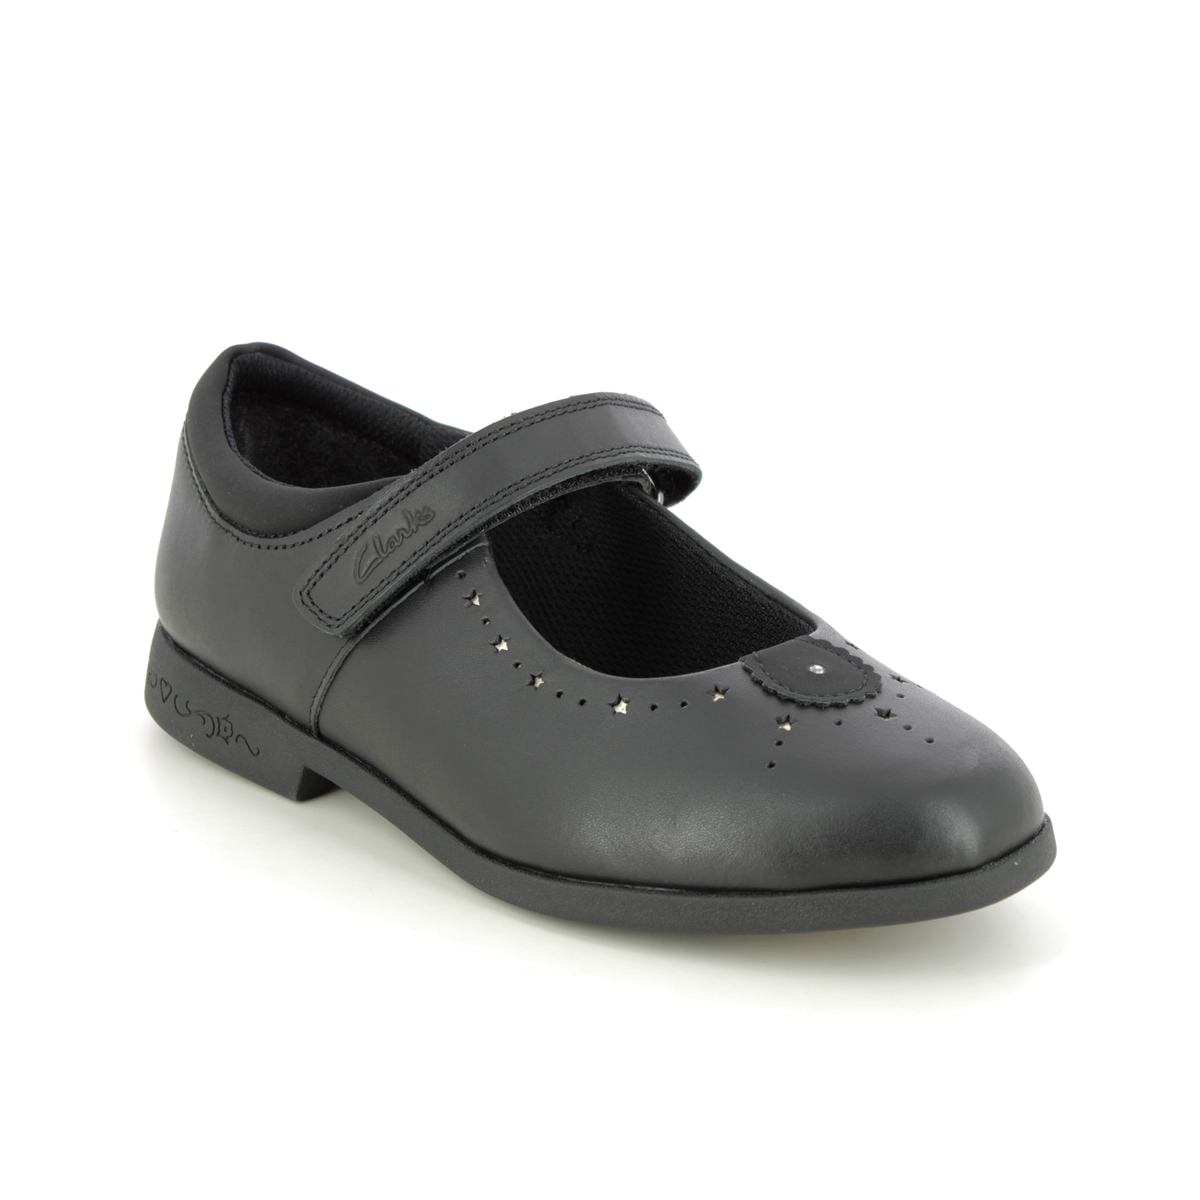 Clarks Magic Step Mj O Black Leather Kids Girls School Shoes 697057G In Size 3 In Plain Black Leather G Width Fitting For School For kids